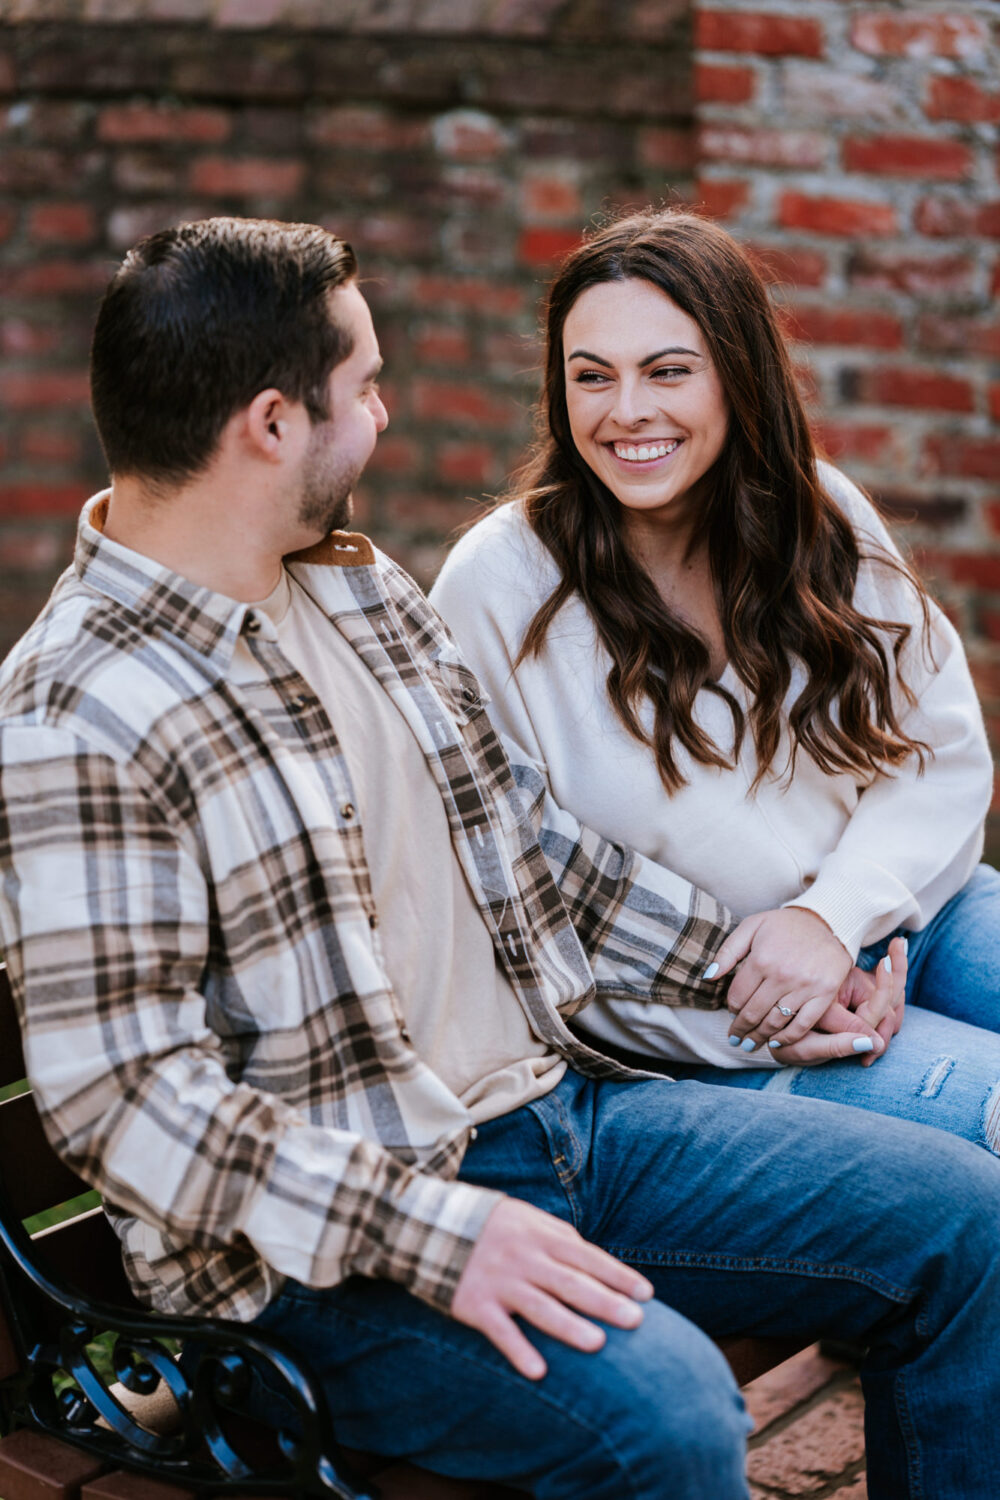 girl looking at her fiance and smiling while they sit on a bench together